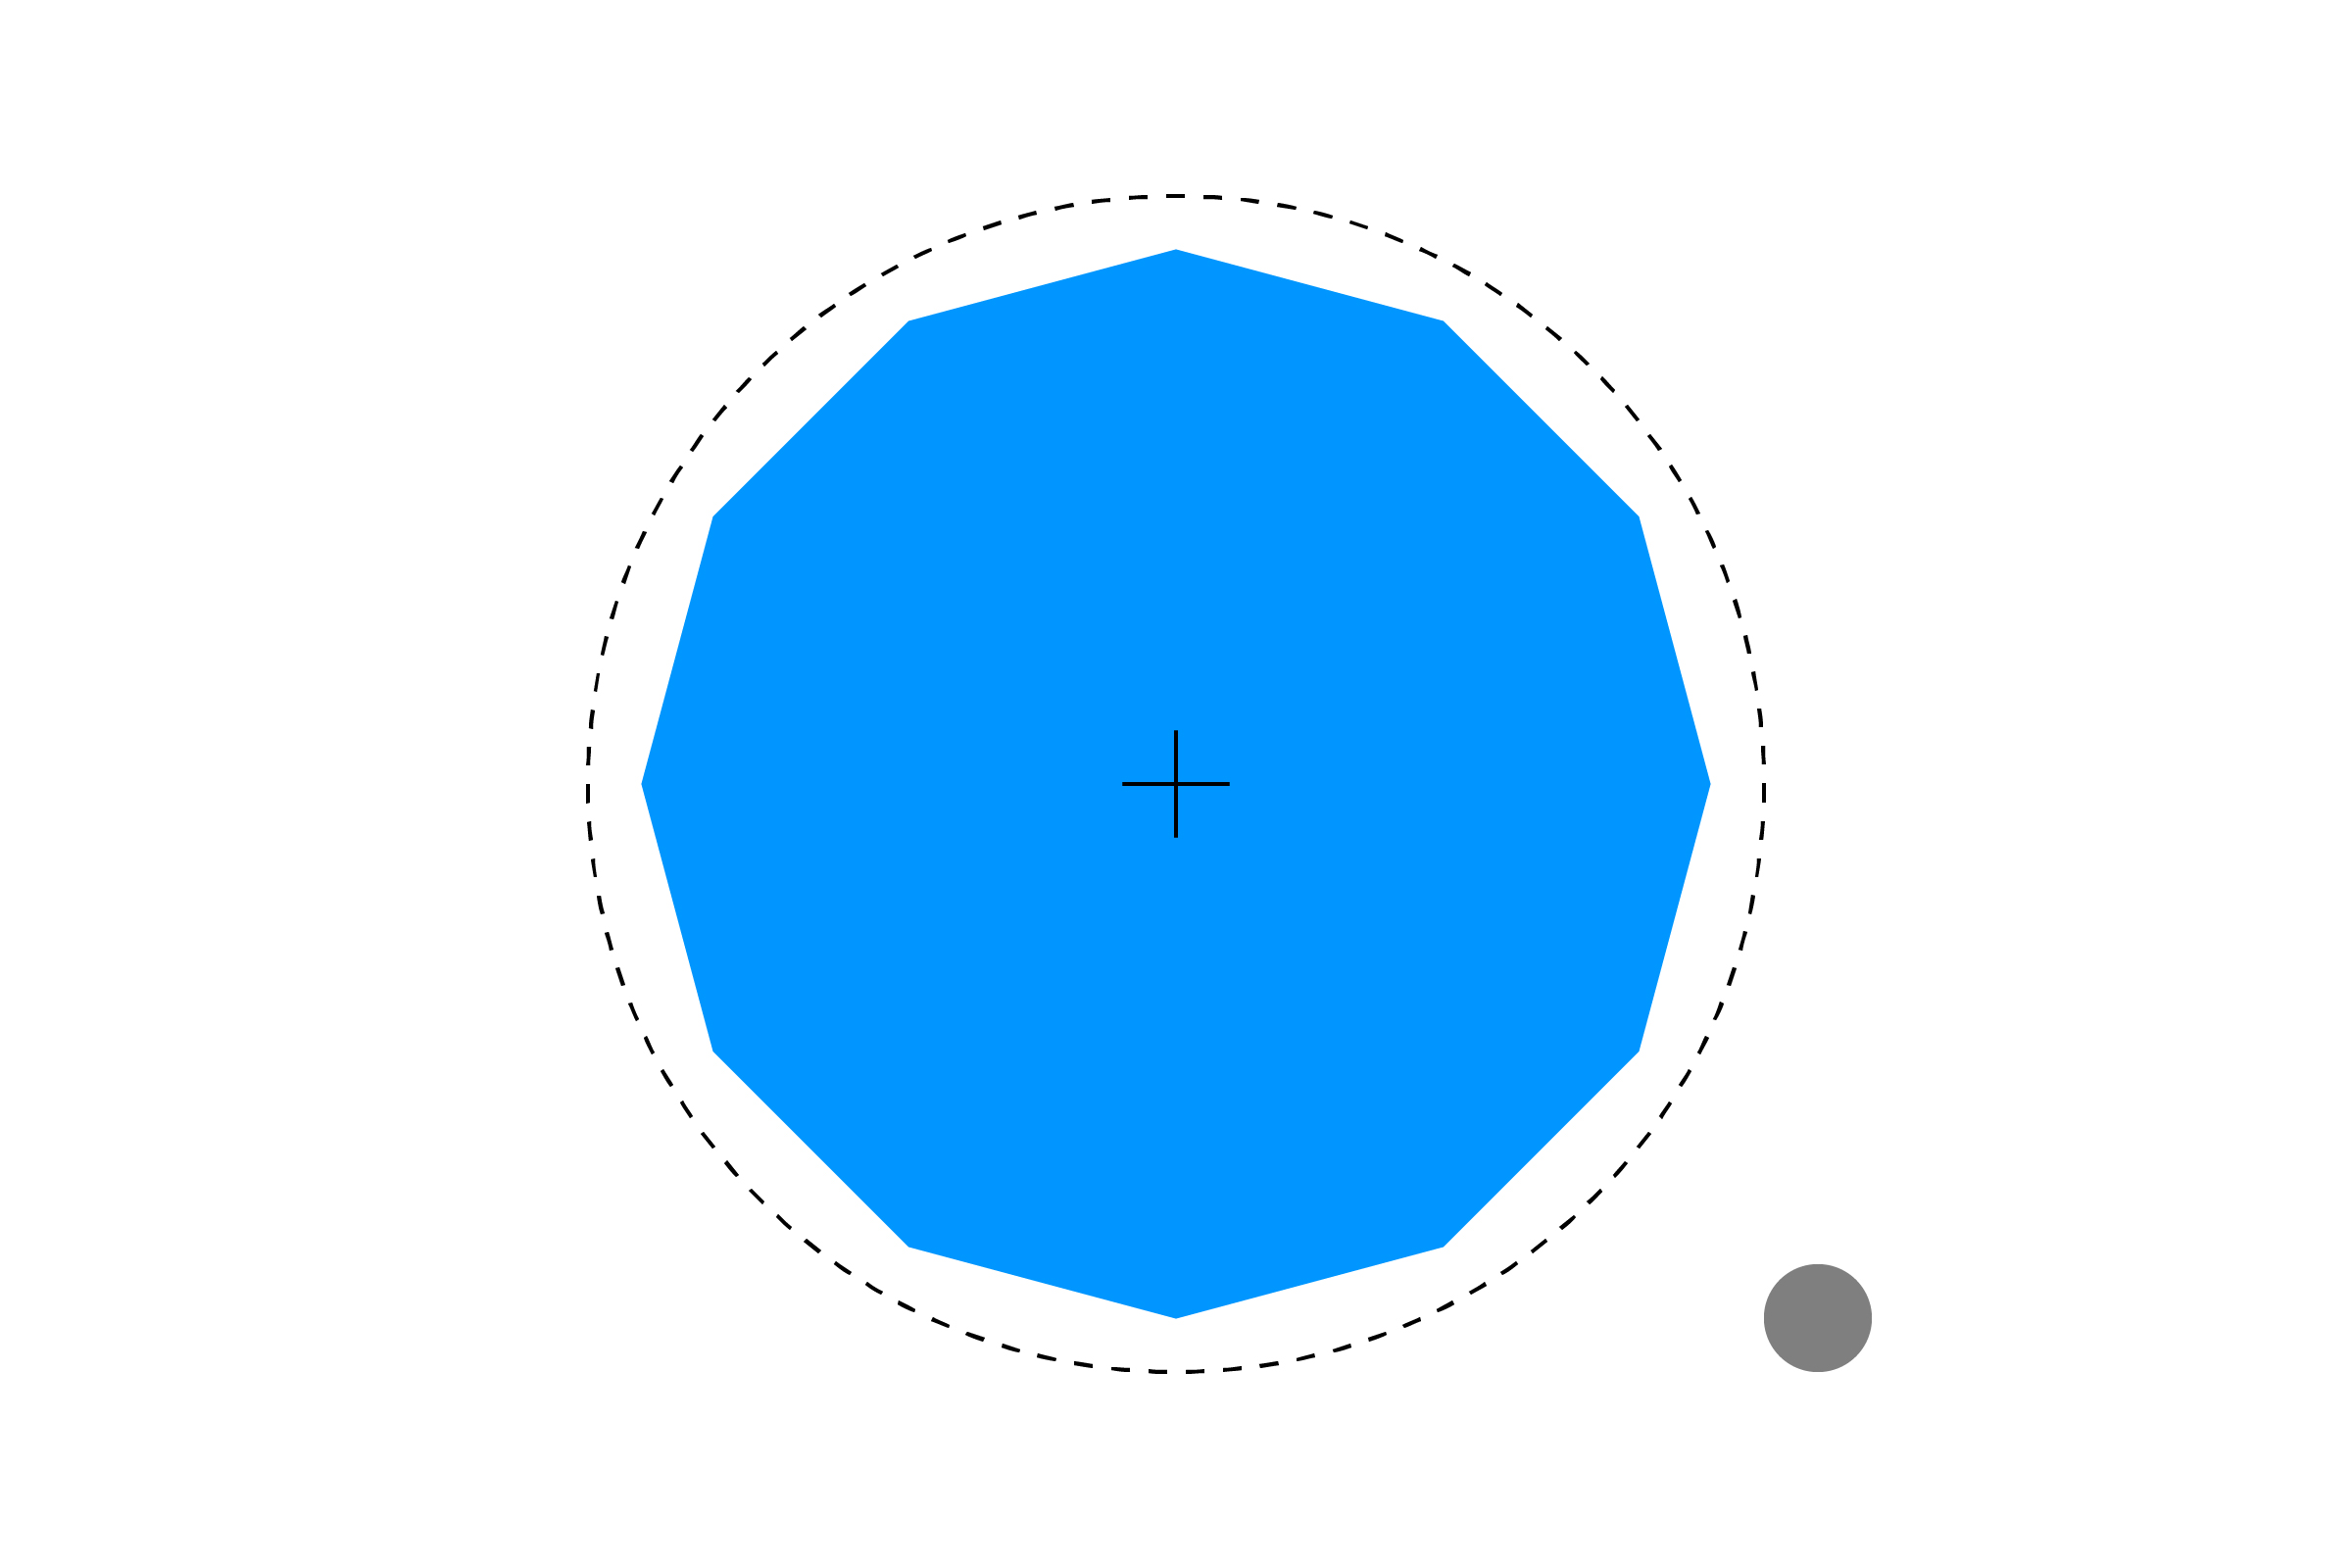 An example of a bounding circle